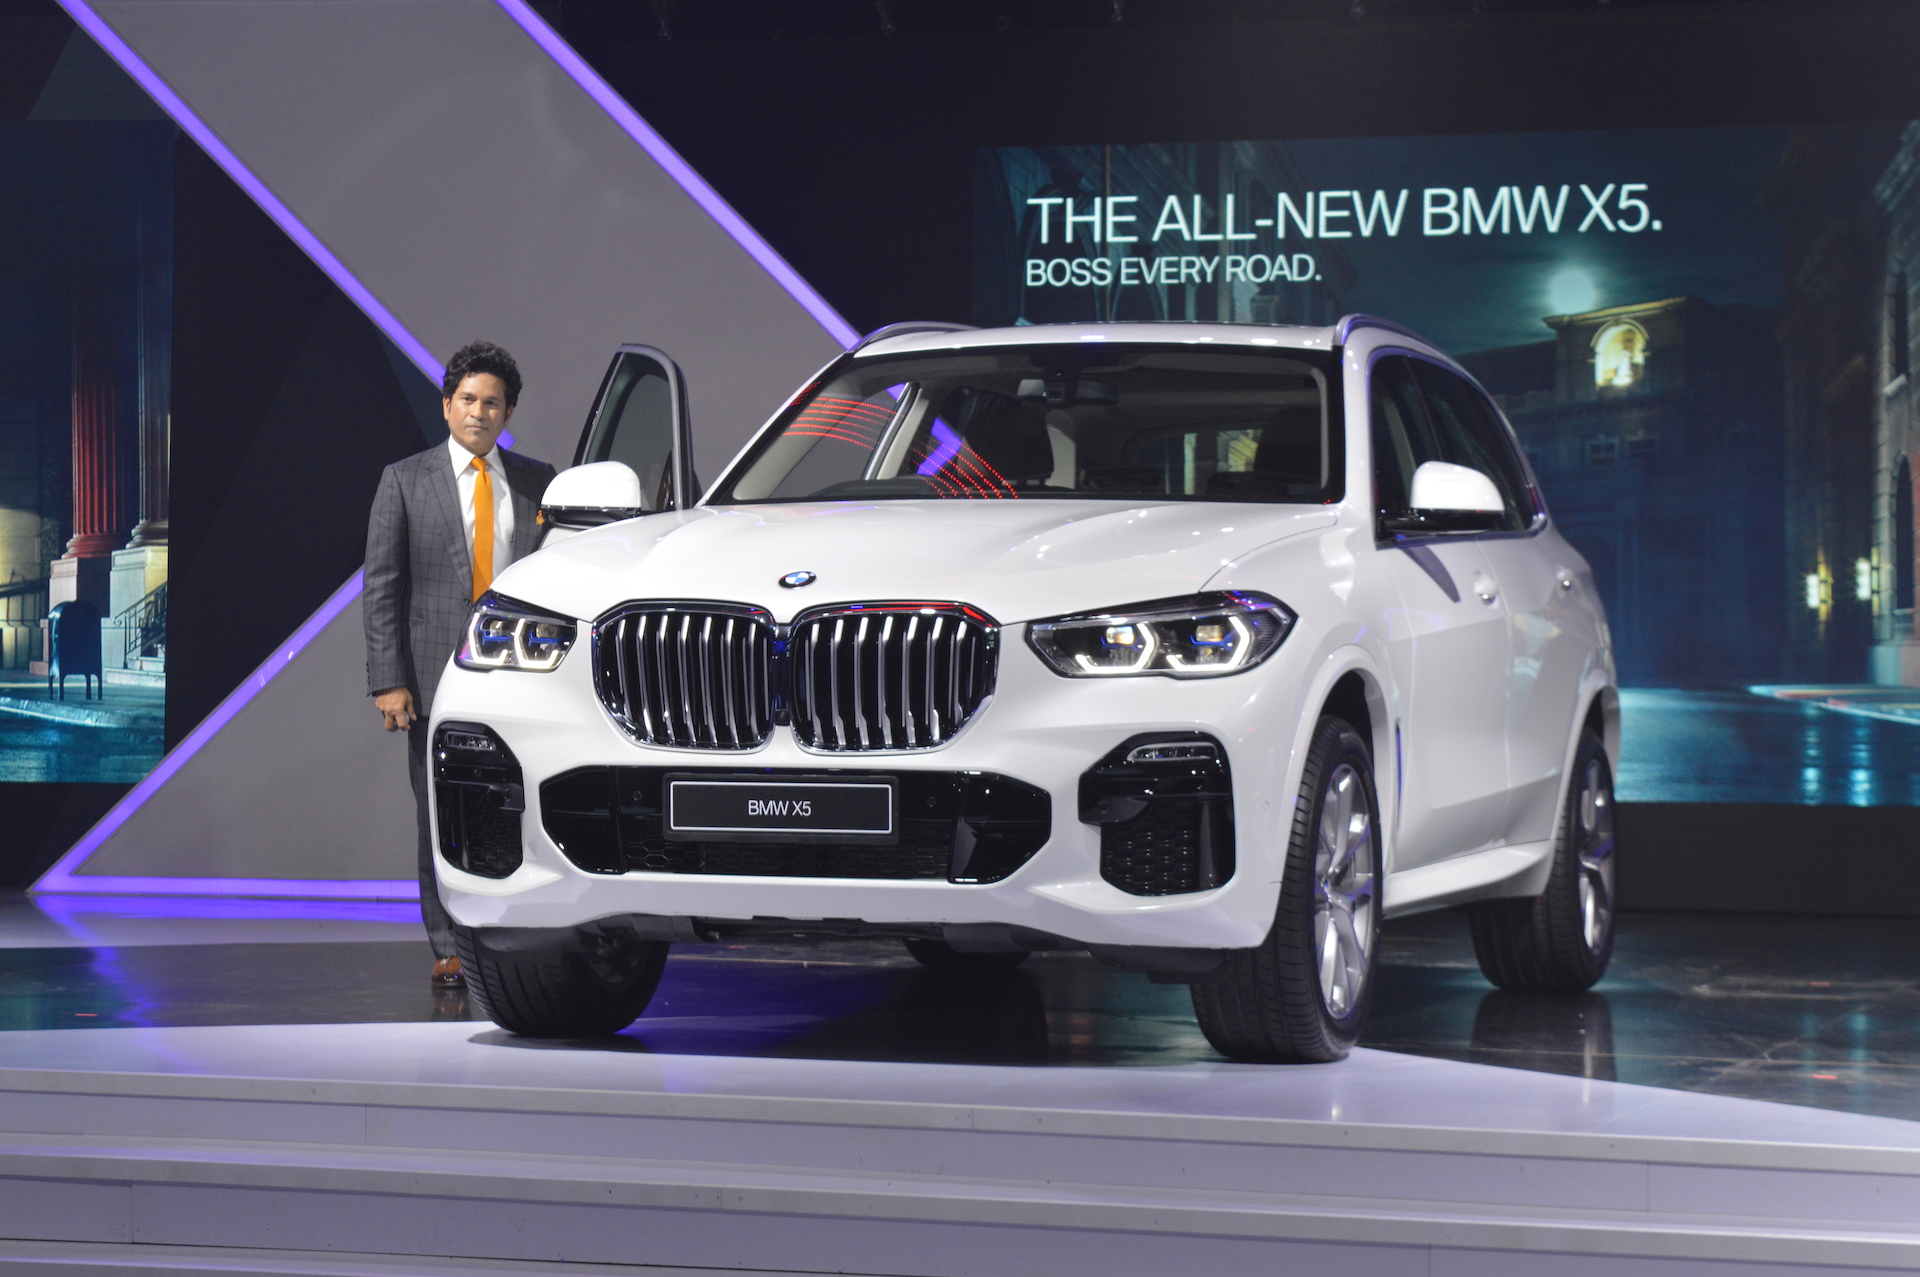 2019 Bmw X5 Launched In India Priced From Inr 72 90 Lakh